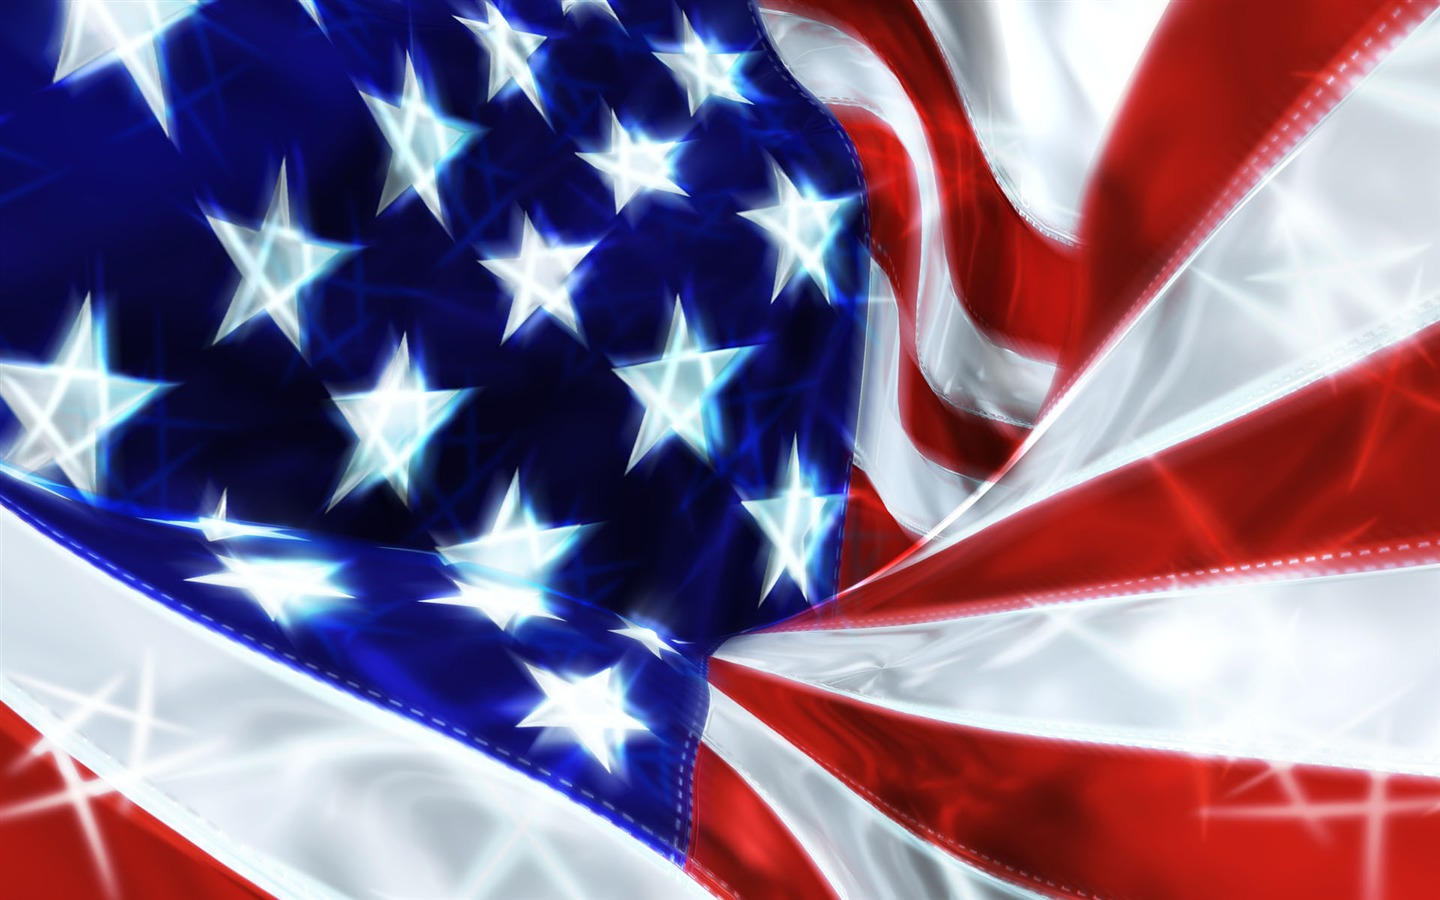 U.S. Independence Day theme wallpaper #4 - 1440x900